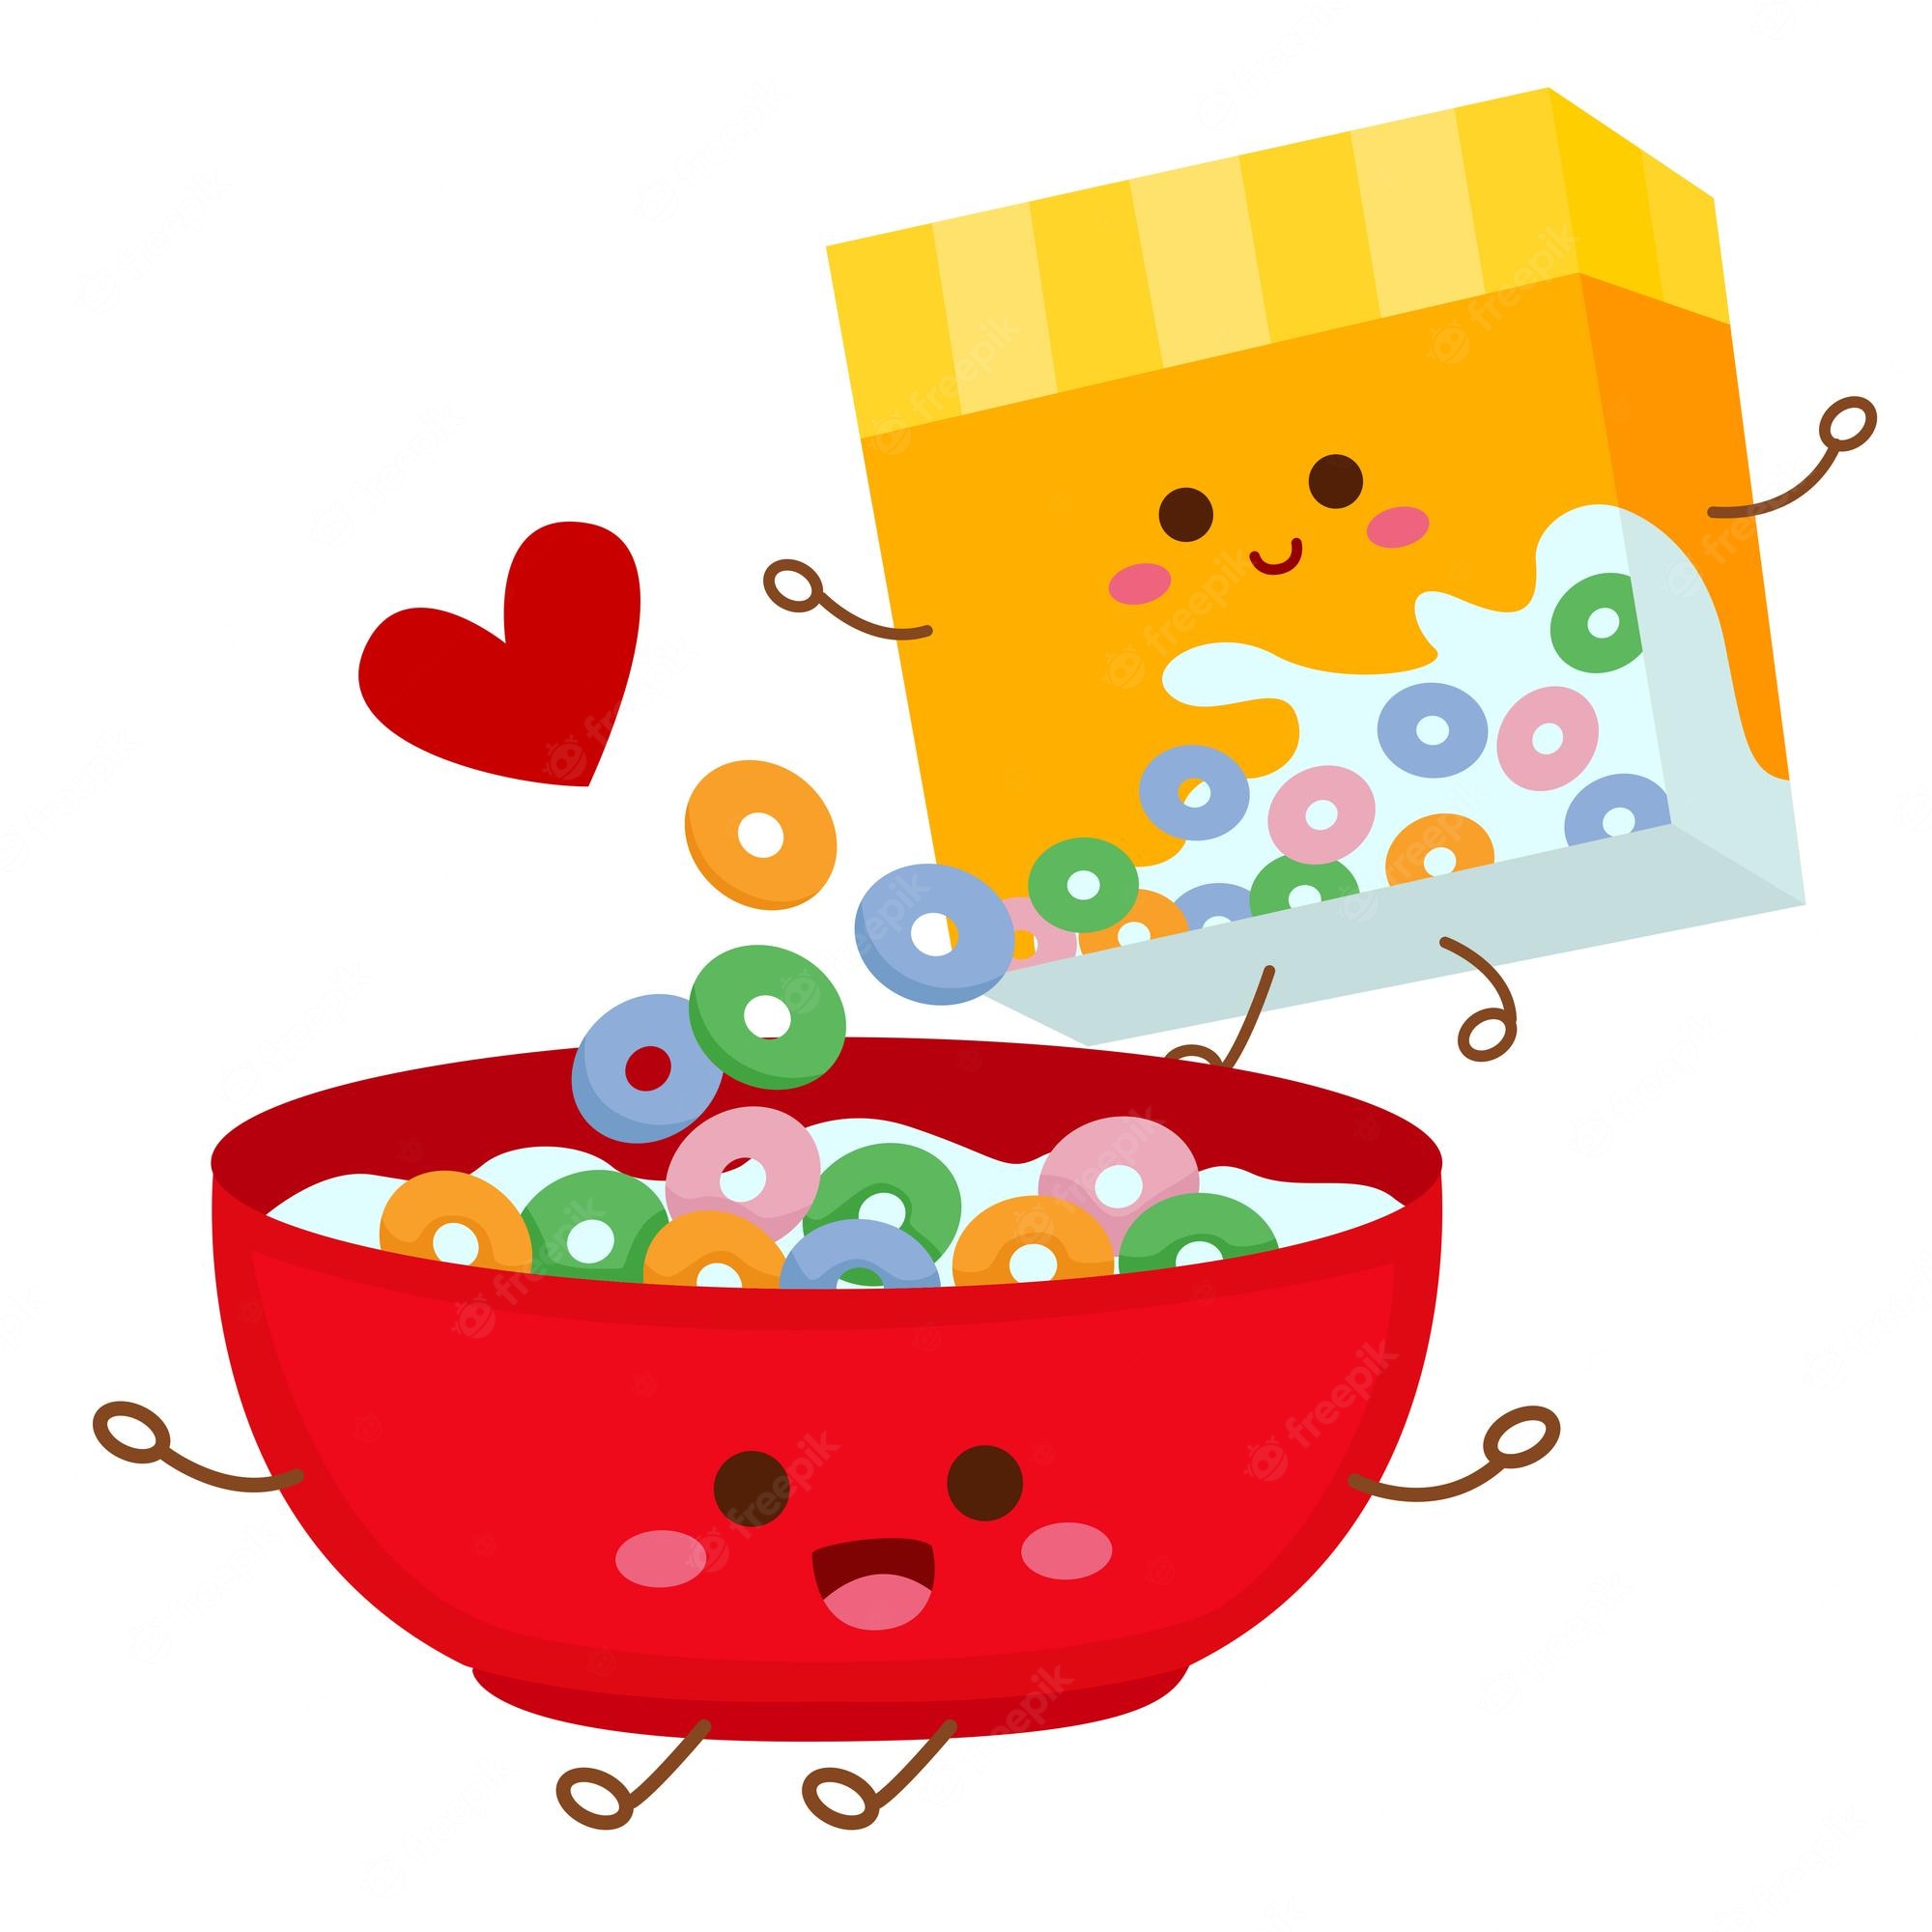 Cereal Bowl Clipart, Breakfast Clip Art, Food Meal Diet Bowls